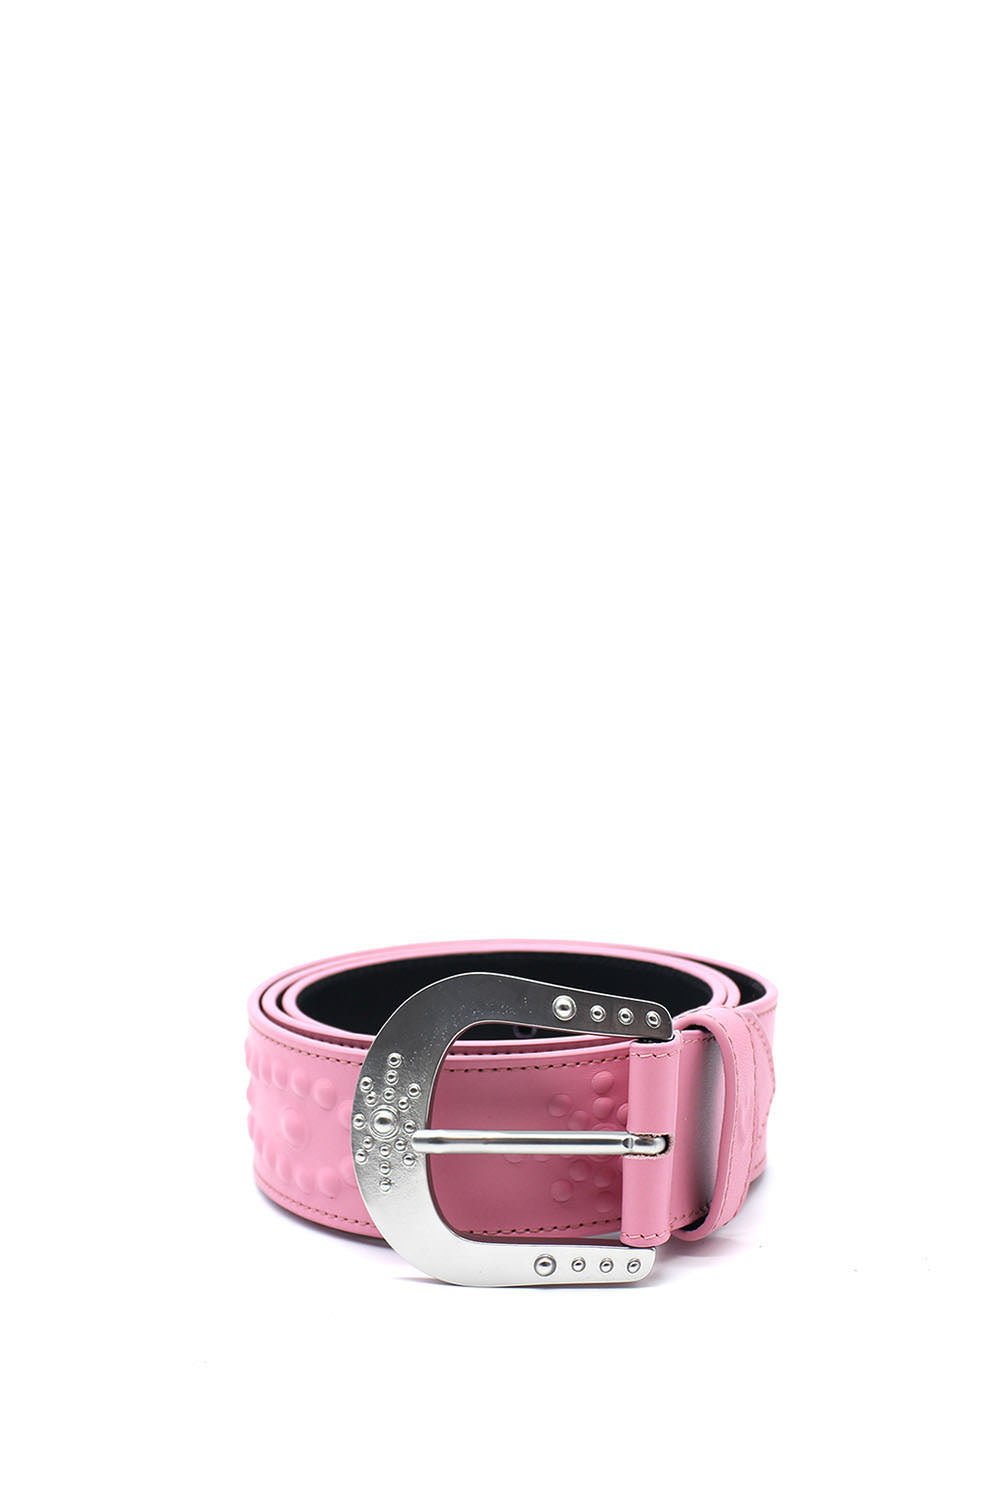 MIRAGE BELT Pink leather belt, zama buckle, with HTC shield logo rivet. Height: 4 cm. Made in Italy. HTC LOS ANGELES